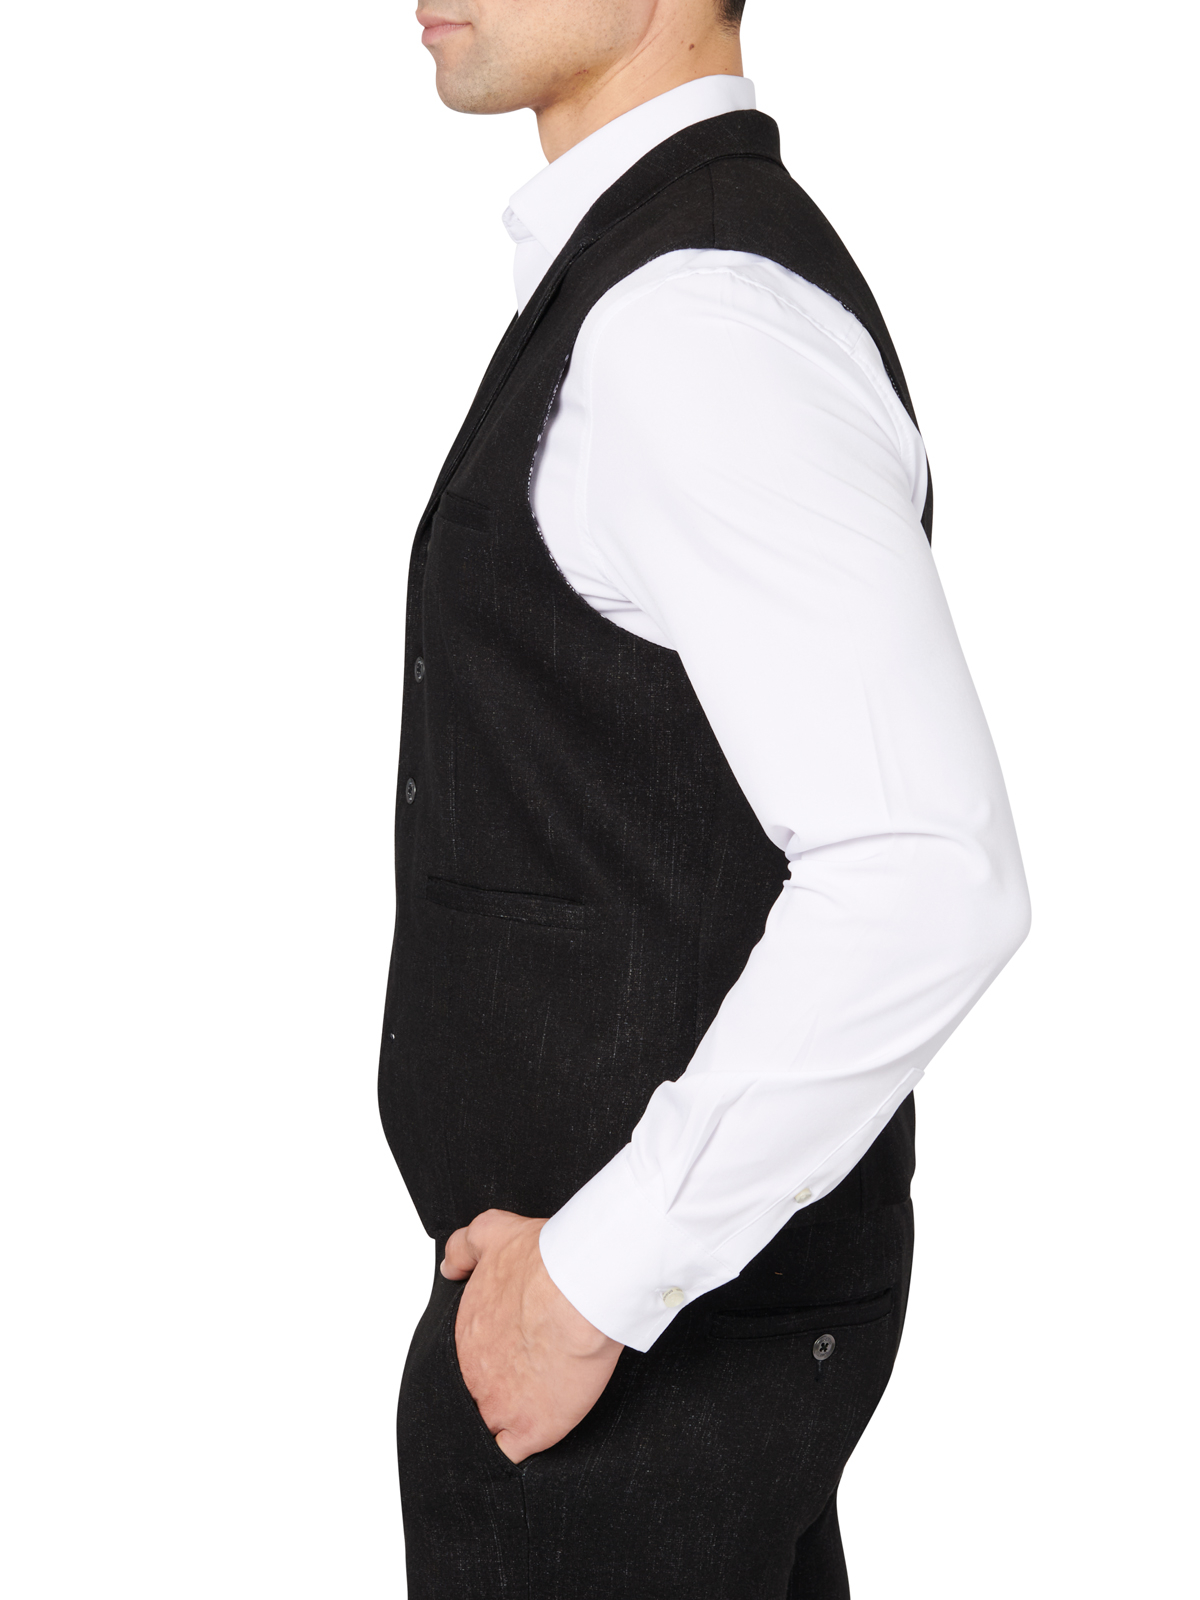 NON SOLID SOLID KNIT VEST